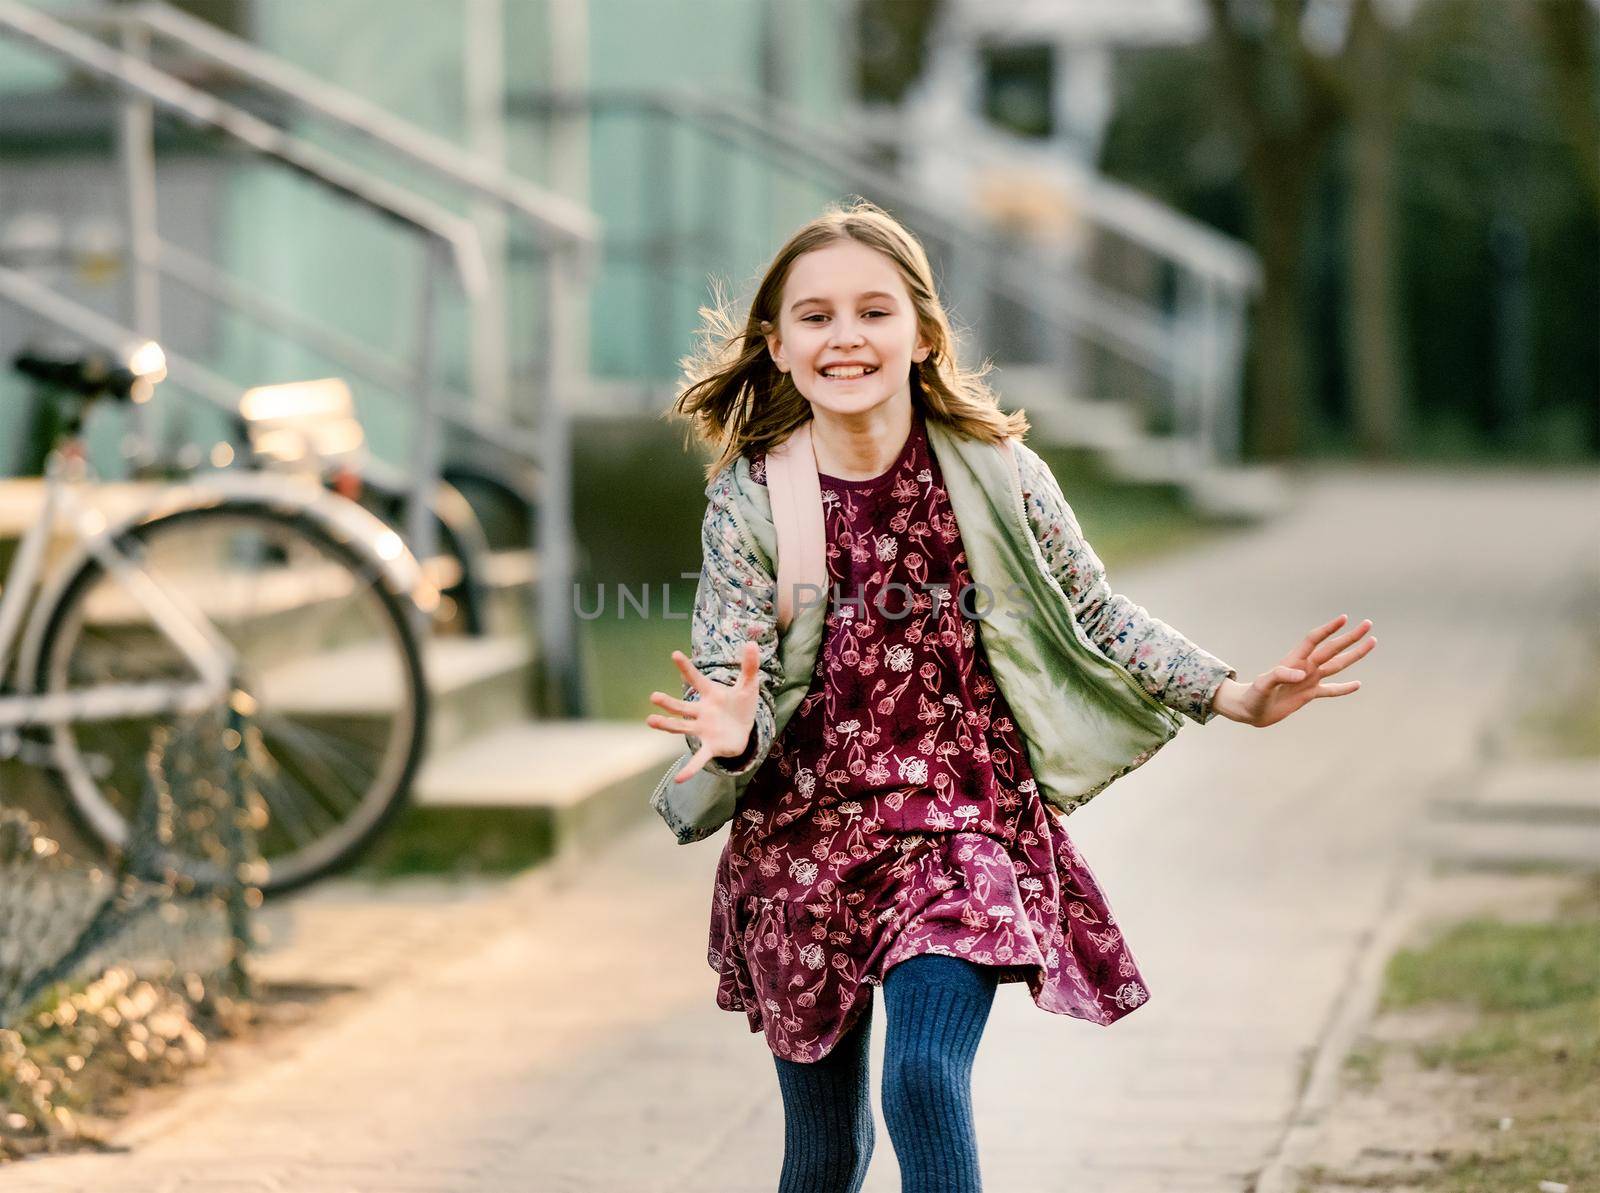 Preteen girl child with backpack at street running, smiling and looking at camera. Pretty schoolgirl going home after class